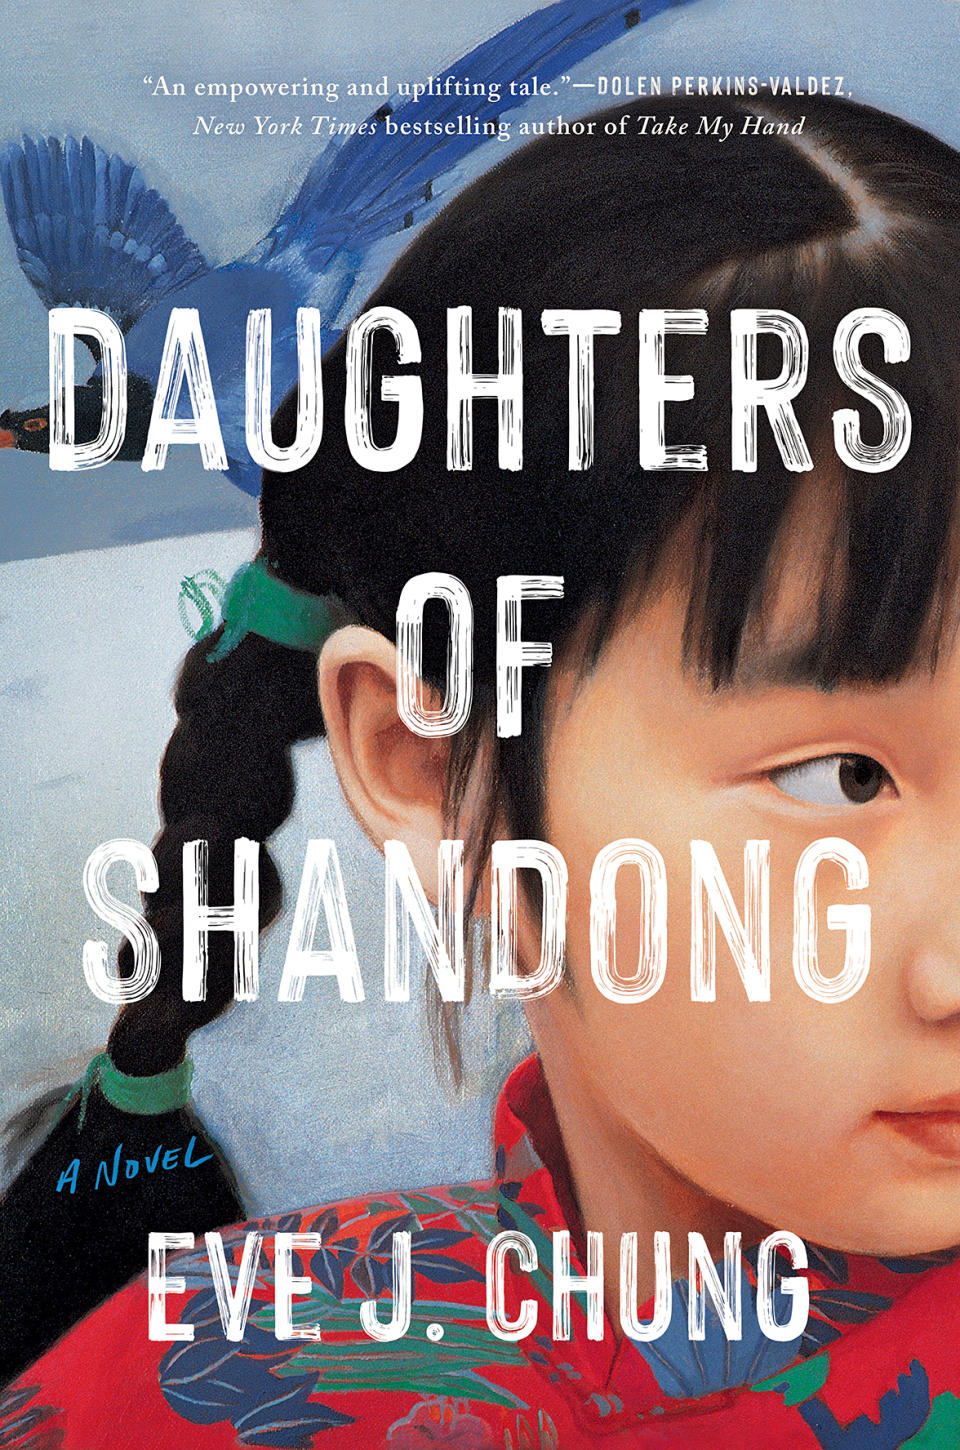 Daughters of Shandong by Eve J. Chung (ww book club) 